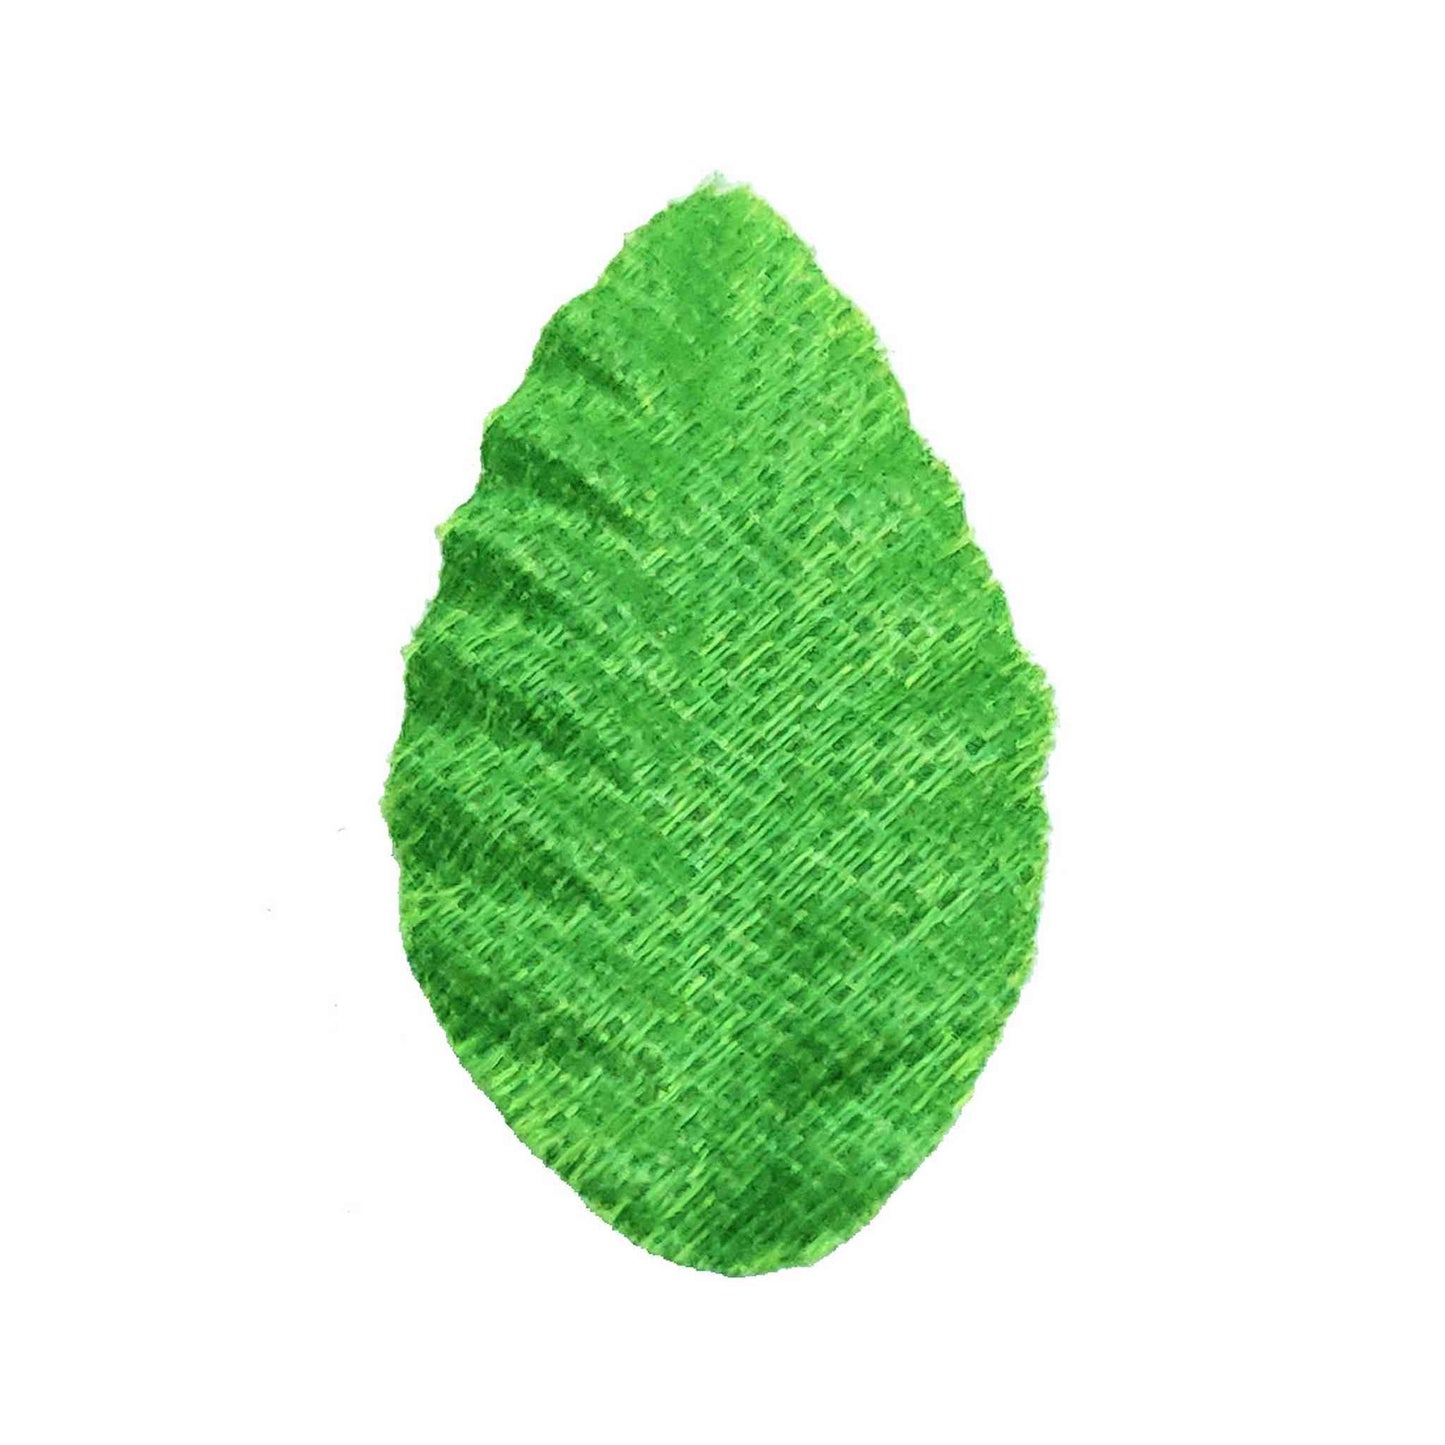 Mini Fabric Leaves for DIY Craft, Trouseau Packing or Decoration (Bunch of 12) - Design 61, Green - Indian Petals